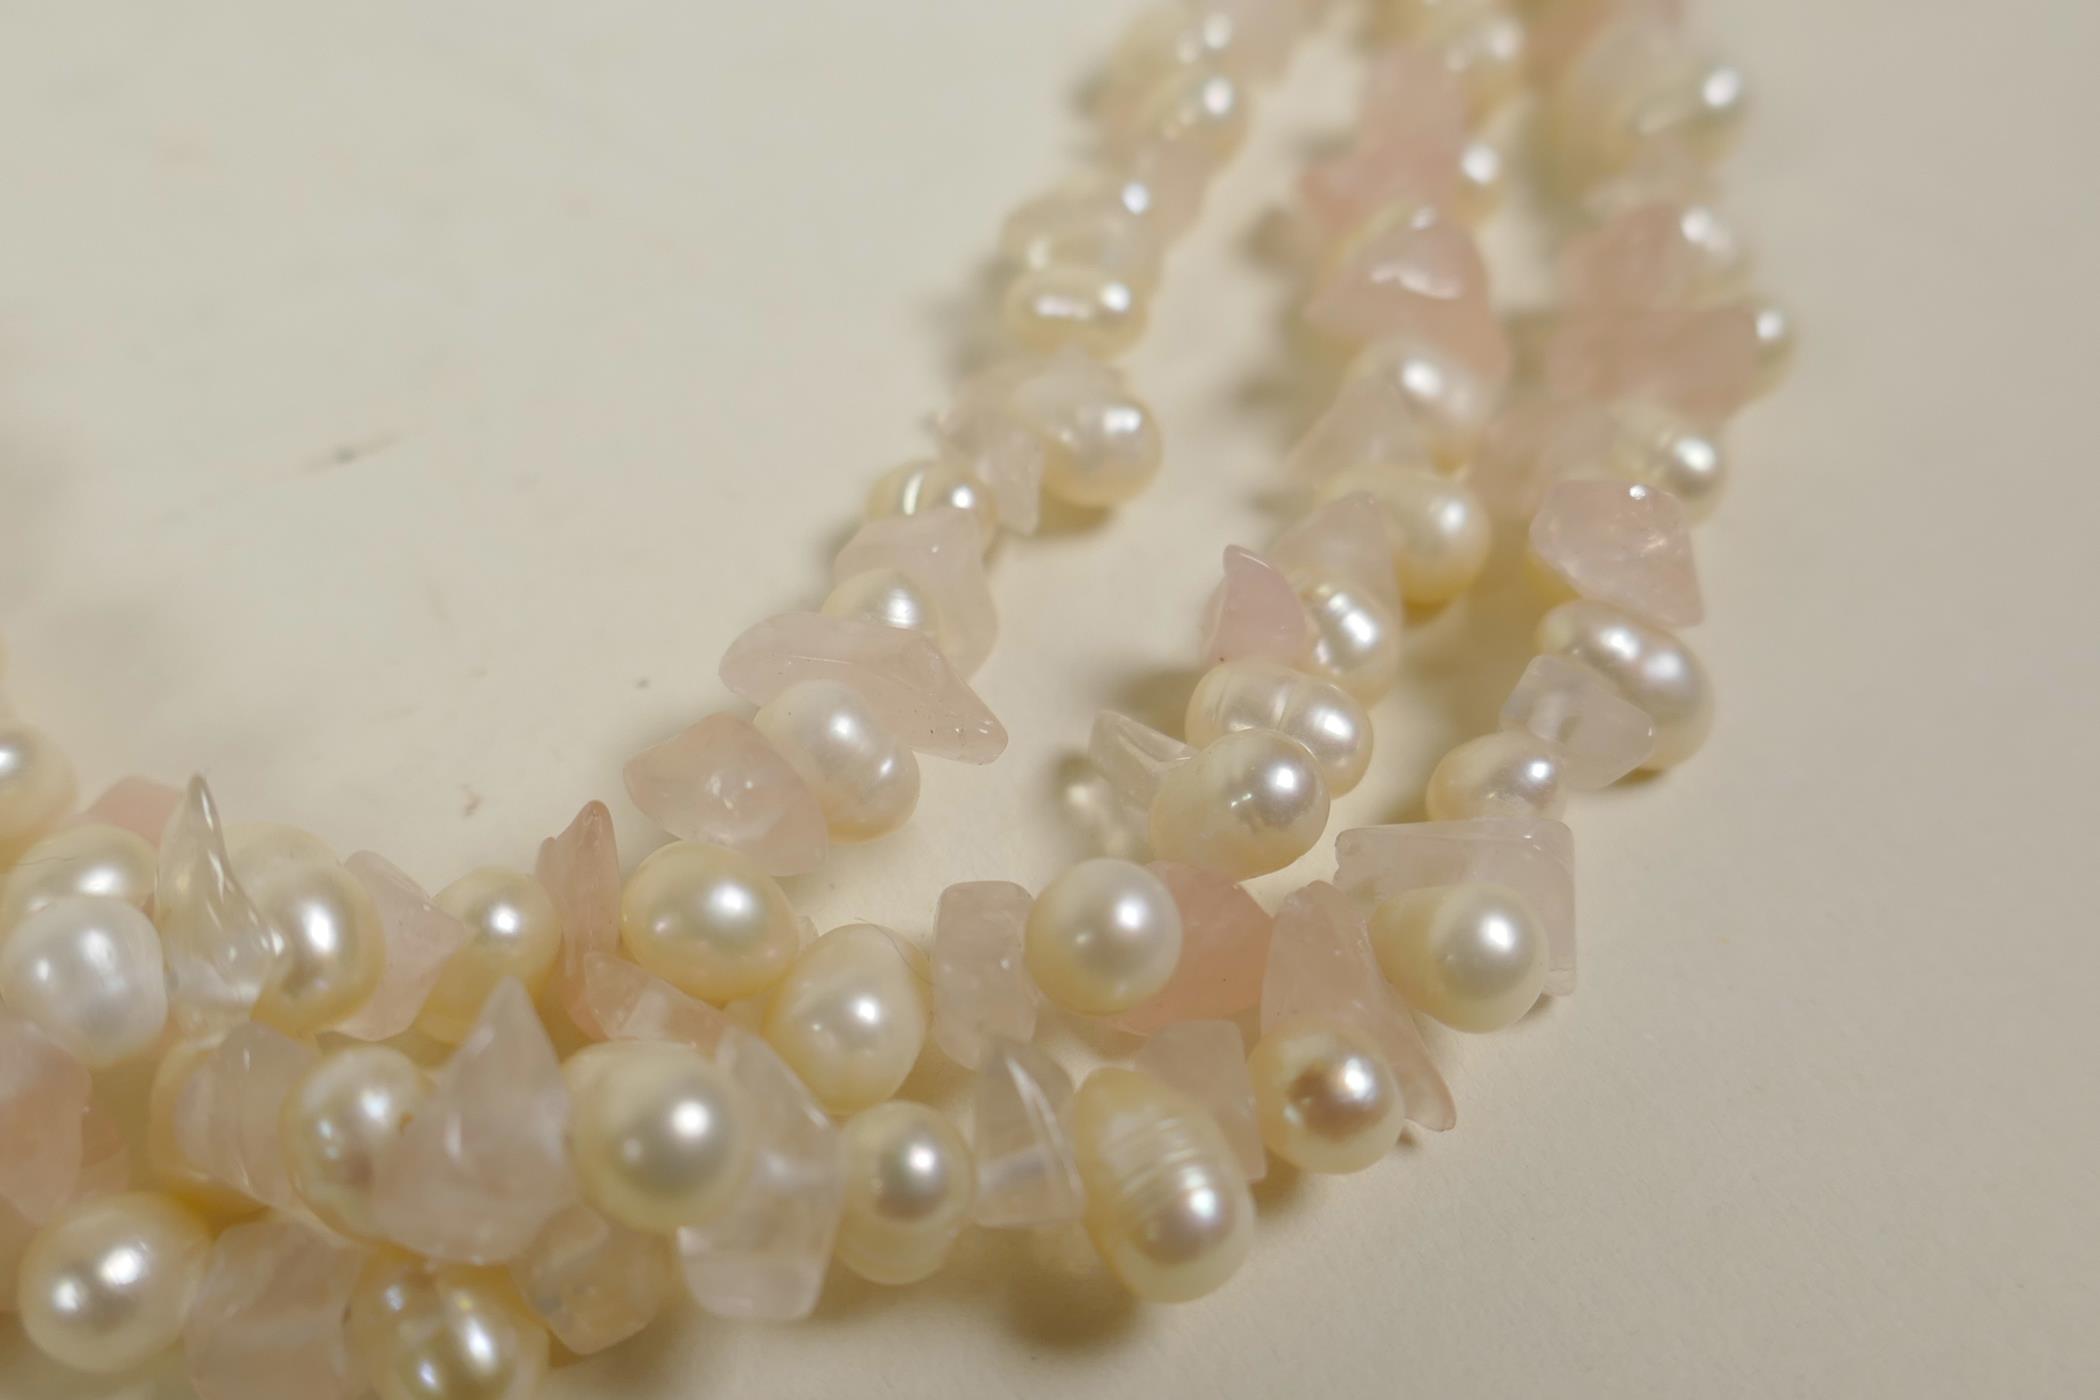 A freshwater pearl and rose quartz triple strand necklace, 18" long - Image 2 of 3